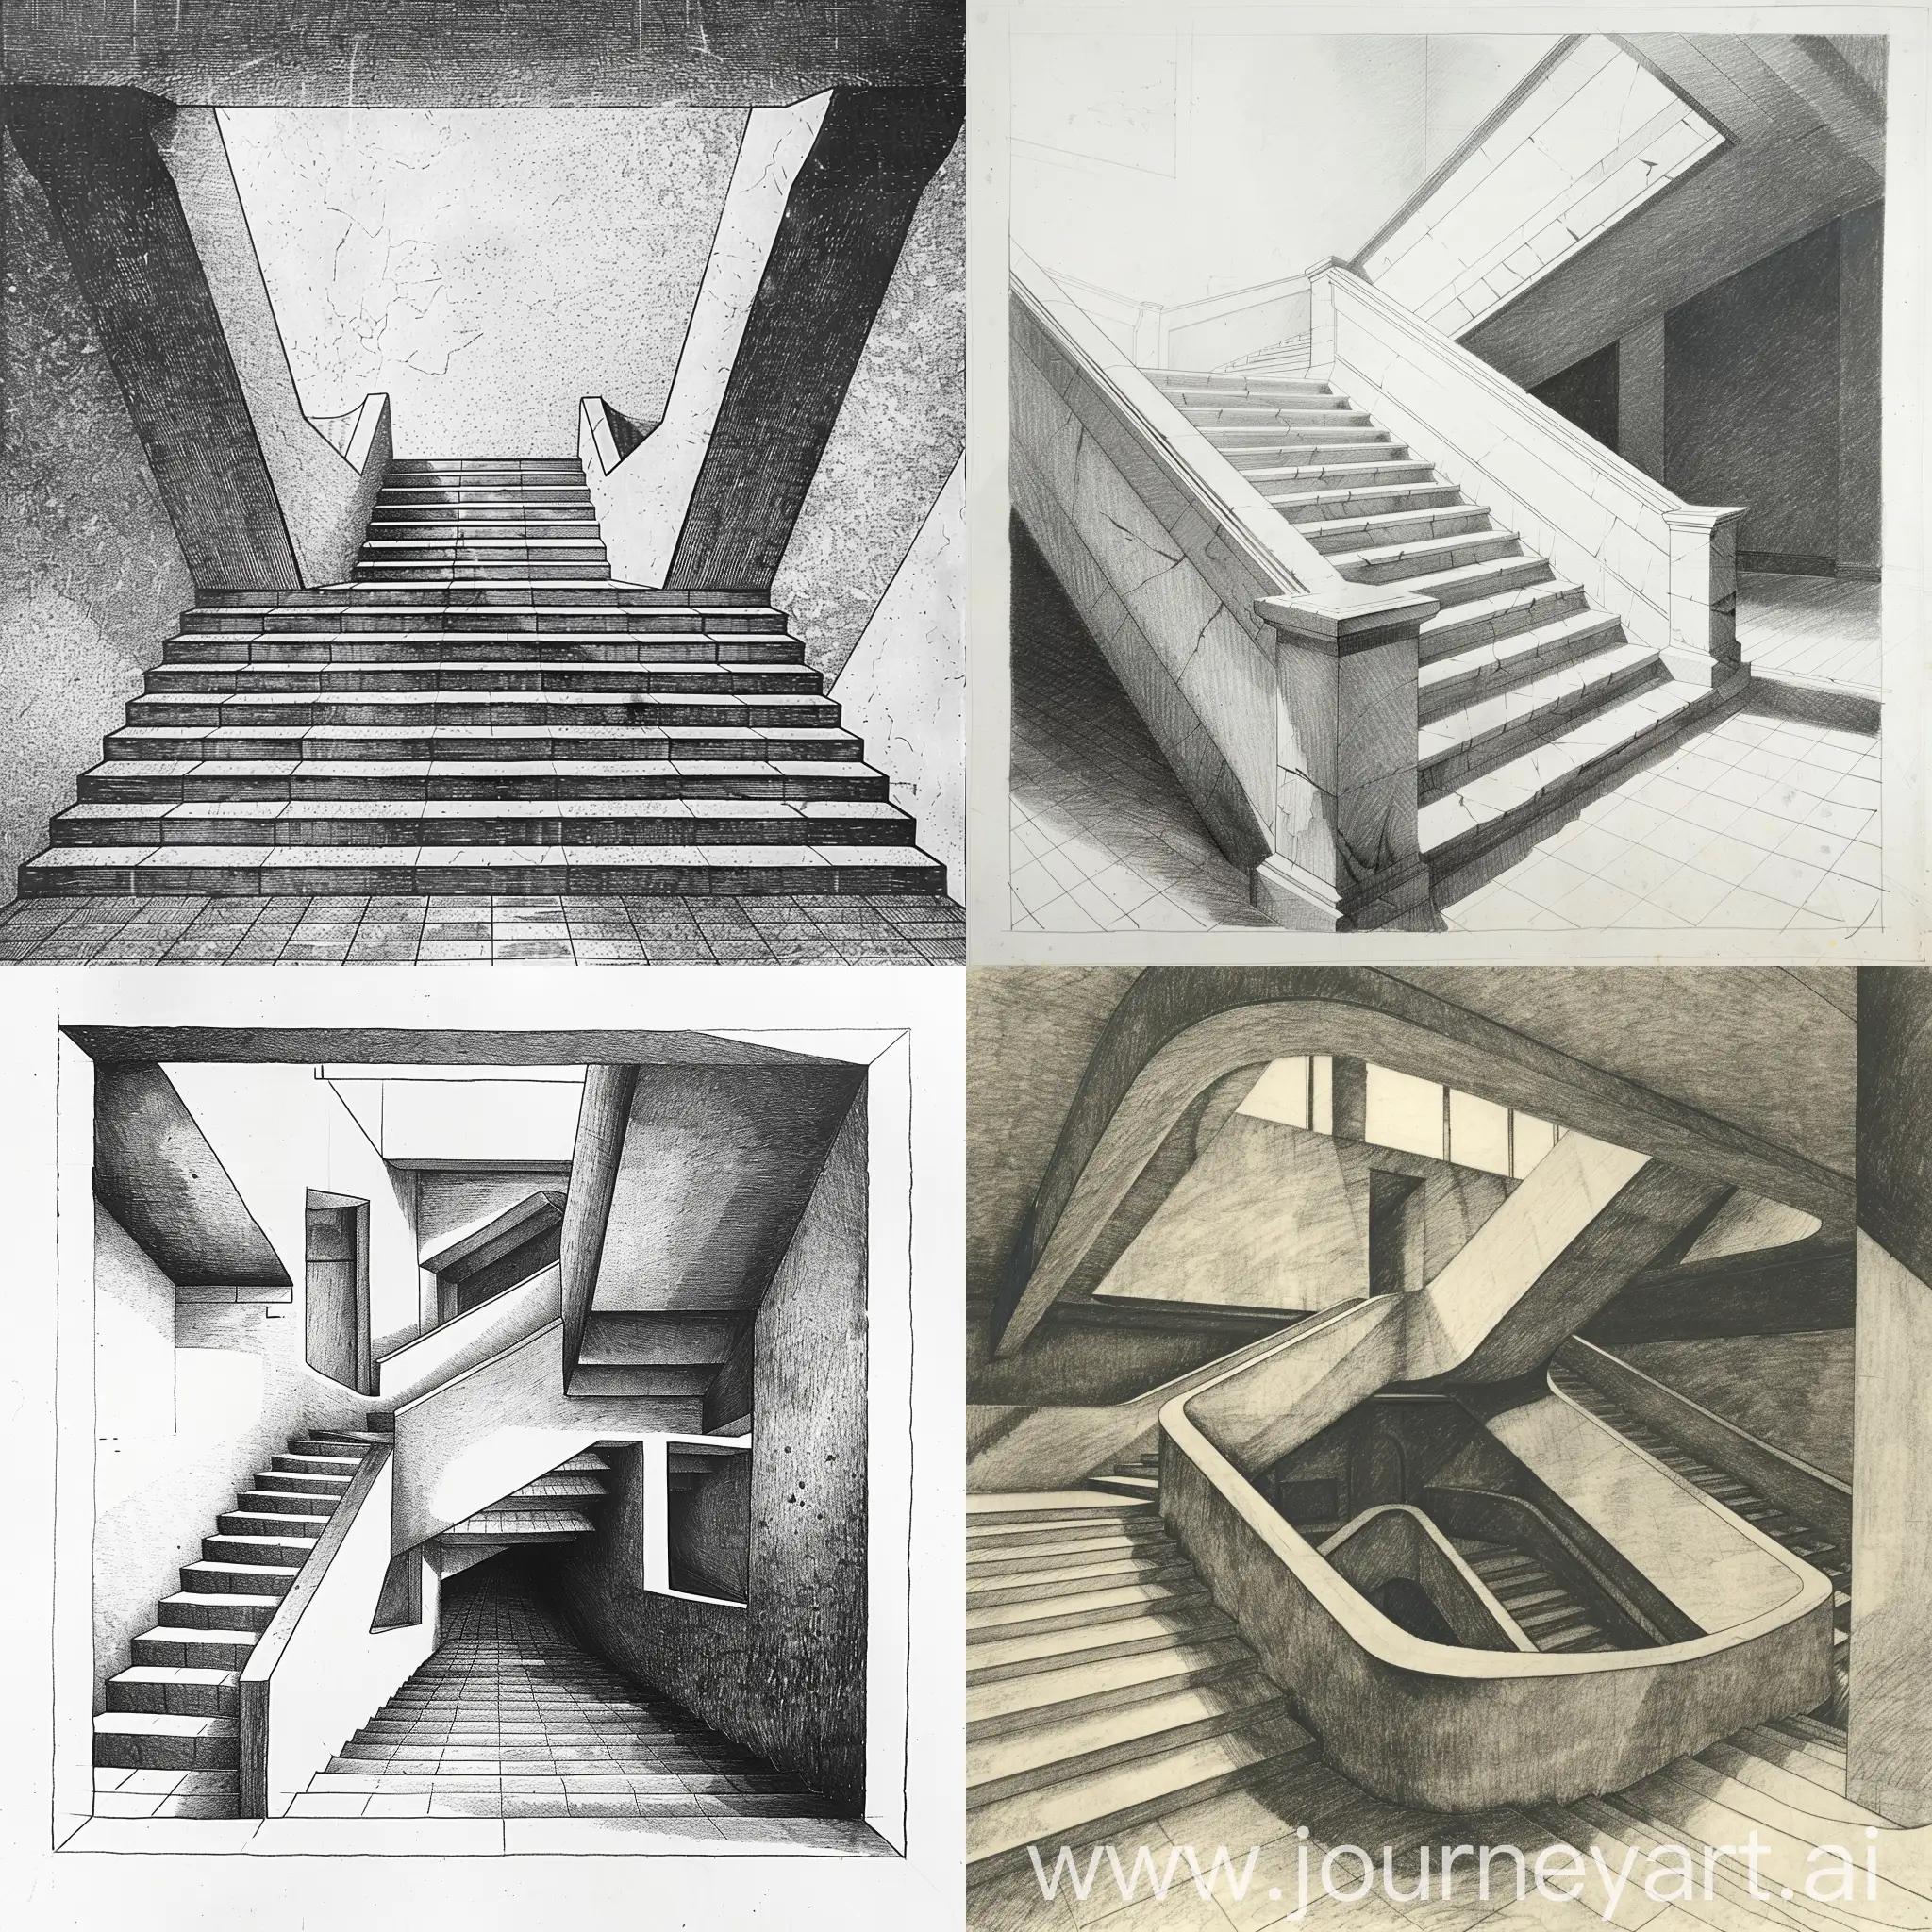 An image of double-armed staircase in two point perspective